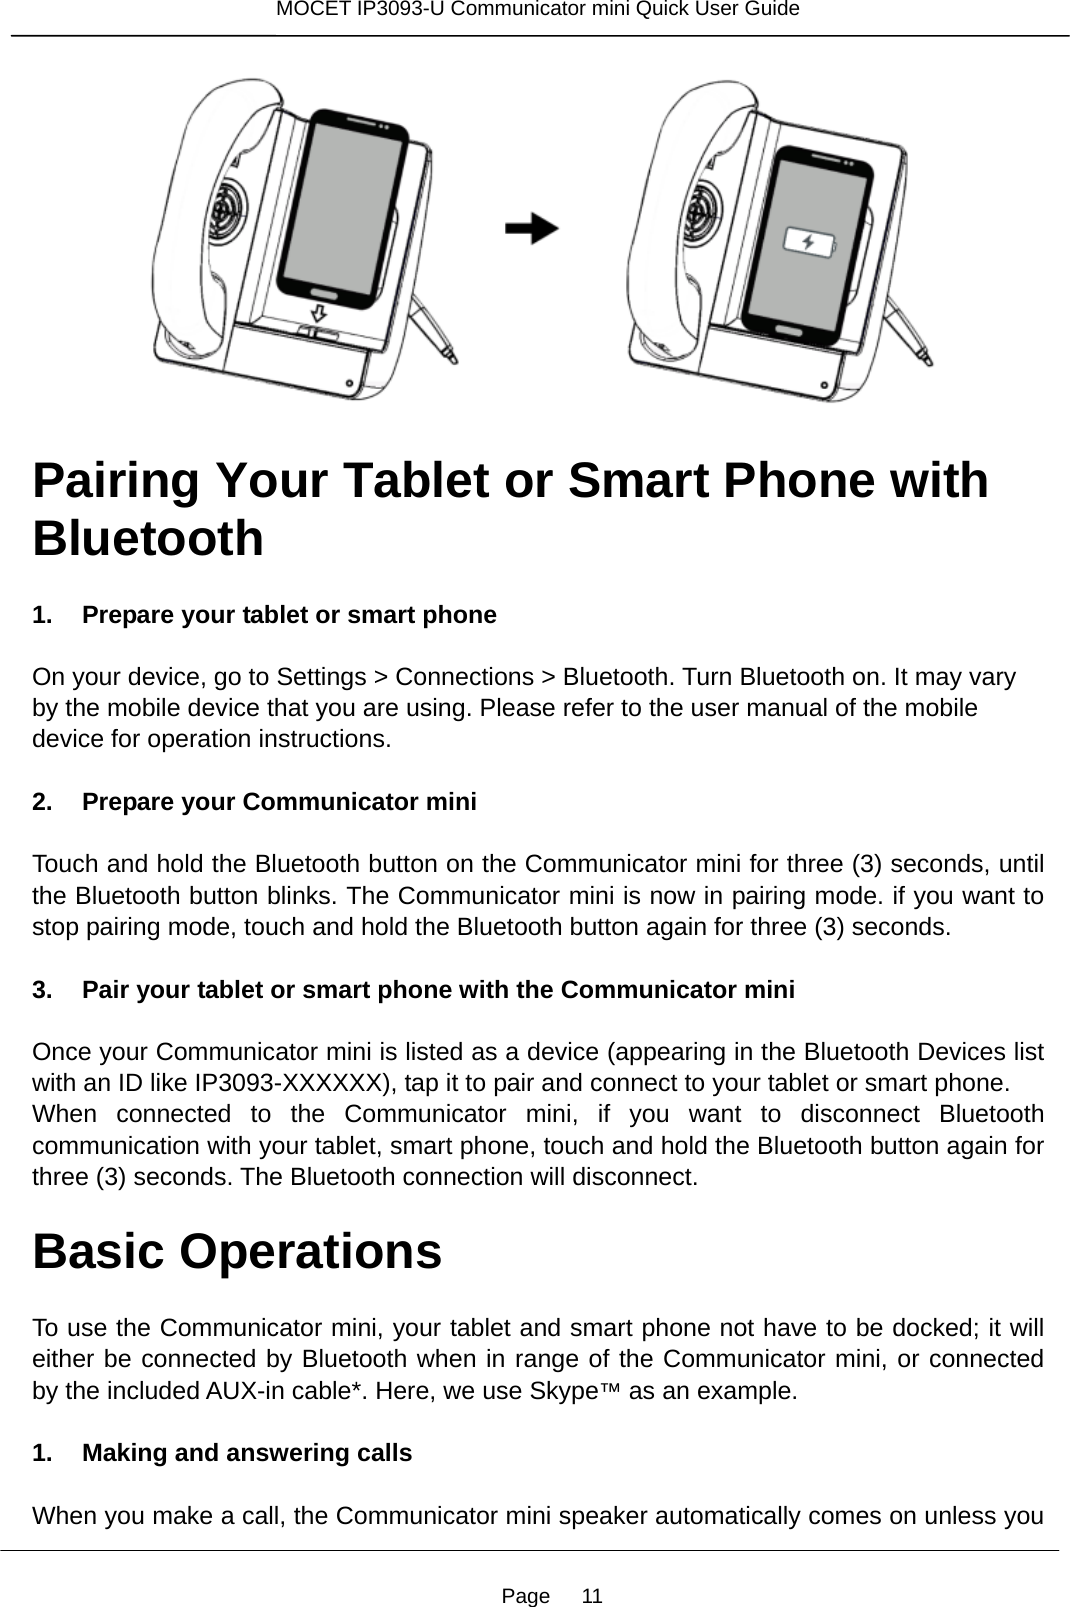 Page   11 MOCET IP3093-U Communicator mini Quick User Guide    Pairing Your Tablet or Smart Phone with Bluetooth  1. Prepare your tablet or smart phone  On your device, go to Settings &gt; Connections &gt; Bluetooth. Turn Bluetooth on. It may vary by the mobile device that you are using. Please refer to the user manual of the mobile device for operation instructions.  2. Prepare your Communicator mini  Touch and hold the Bluetooth button on the Communicator mini for three (3) seconds, until the Bluetooth button blinks. The Communicator mini is now in pairing mode. if you want to stop pairing mode, touch and hold the Bluetooth button again for three (3) seconds.  3. Pair your tablet or smart phone with the Communicator mini  Once your Communicator mini is listed as a device (appearing in the Bluetooth Devices list with an ID like IP3093-XXXXXX), tap it to pair and connect to your tablet or smart phone. When connected to the Communicator mini, if you want to disconnect Bluetooth communication with your tablet, smart phone, touch and hold the Bluetooth button again for three (3) seconds. The Bluetooth connection will disconnect.    Basic Operations  To use the Communicator mini, your tablet and smart phone not have to be docked; it will either be connected by Bluetooth when in range of the Communicator mini, or connected by the included AUX-in cable*. Here, we use Skype™ as an example.  1. Making and answering calls  When you make a call, the Communicator mini speaker automatically comes on unless you 